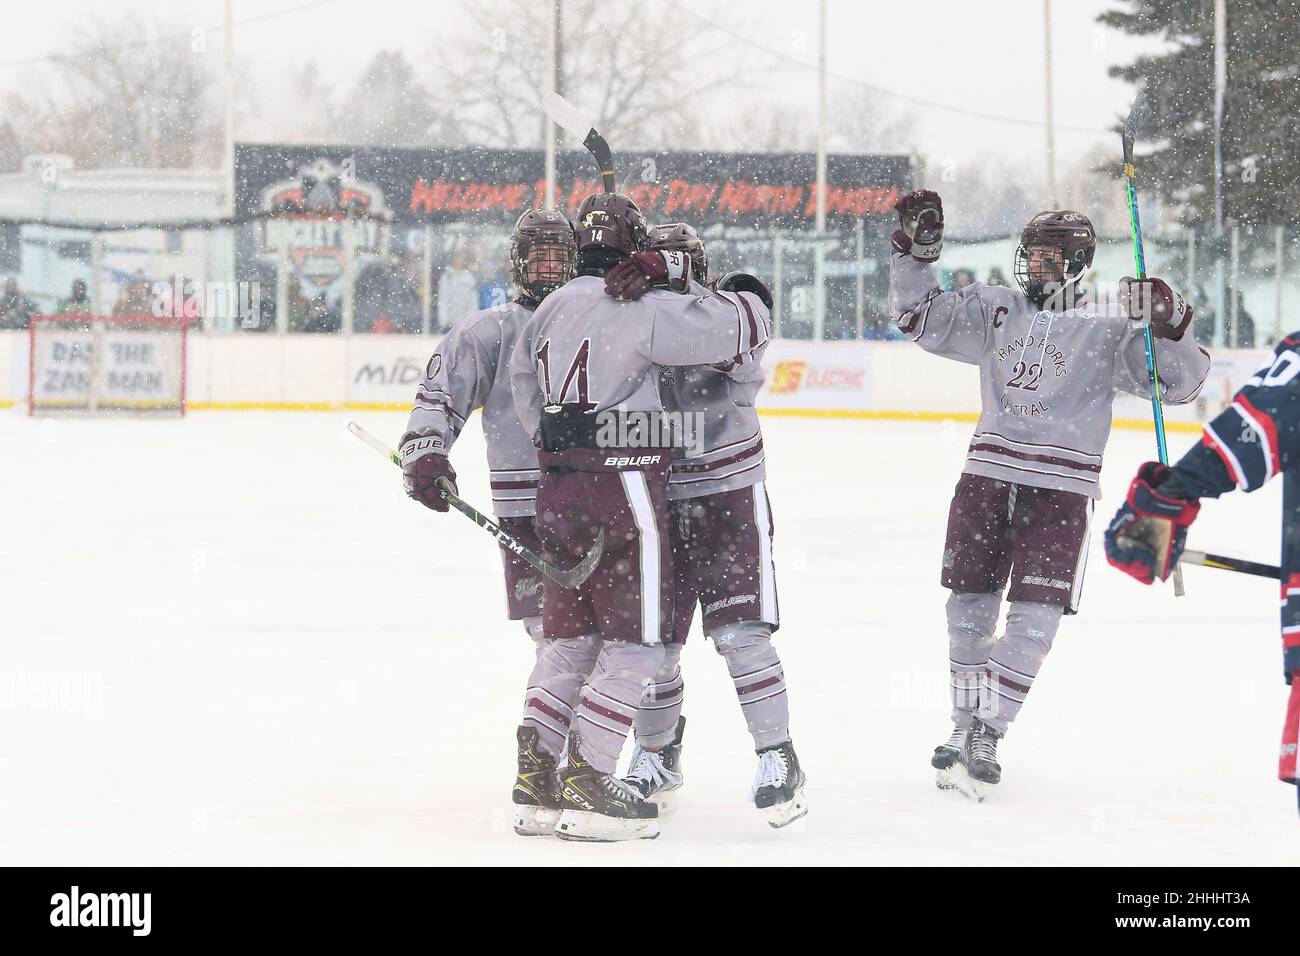 Members of the Grand Forks Central Knights celebrate after scoring a goal during the 3rd annual Hockey Day North Dakota outdoor hockey event in Jamestown, ND. Youth, high school and college hockey teams from around North Dakota competed over two days. By Russell Hons/CSM Stock Photo